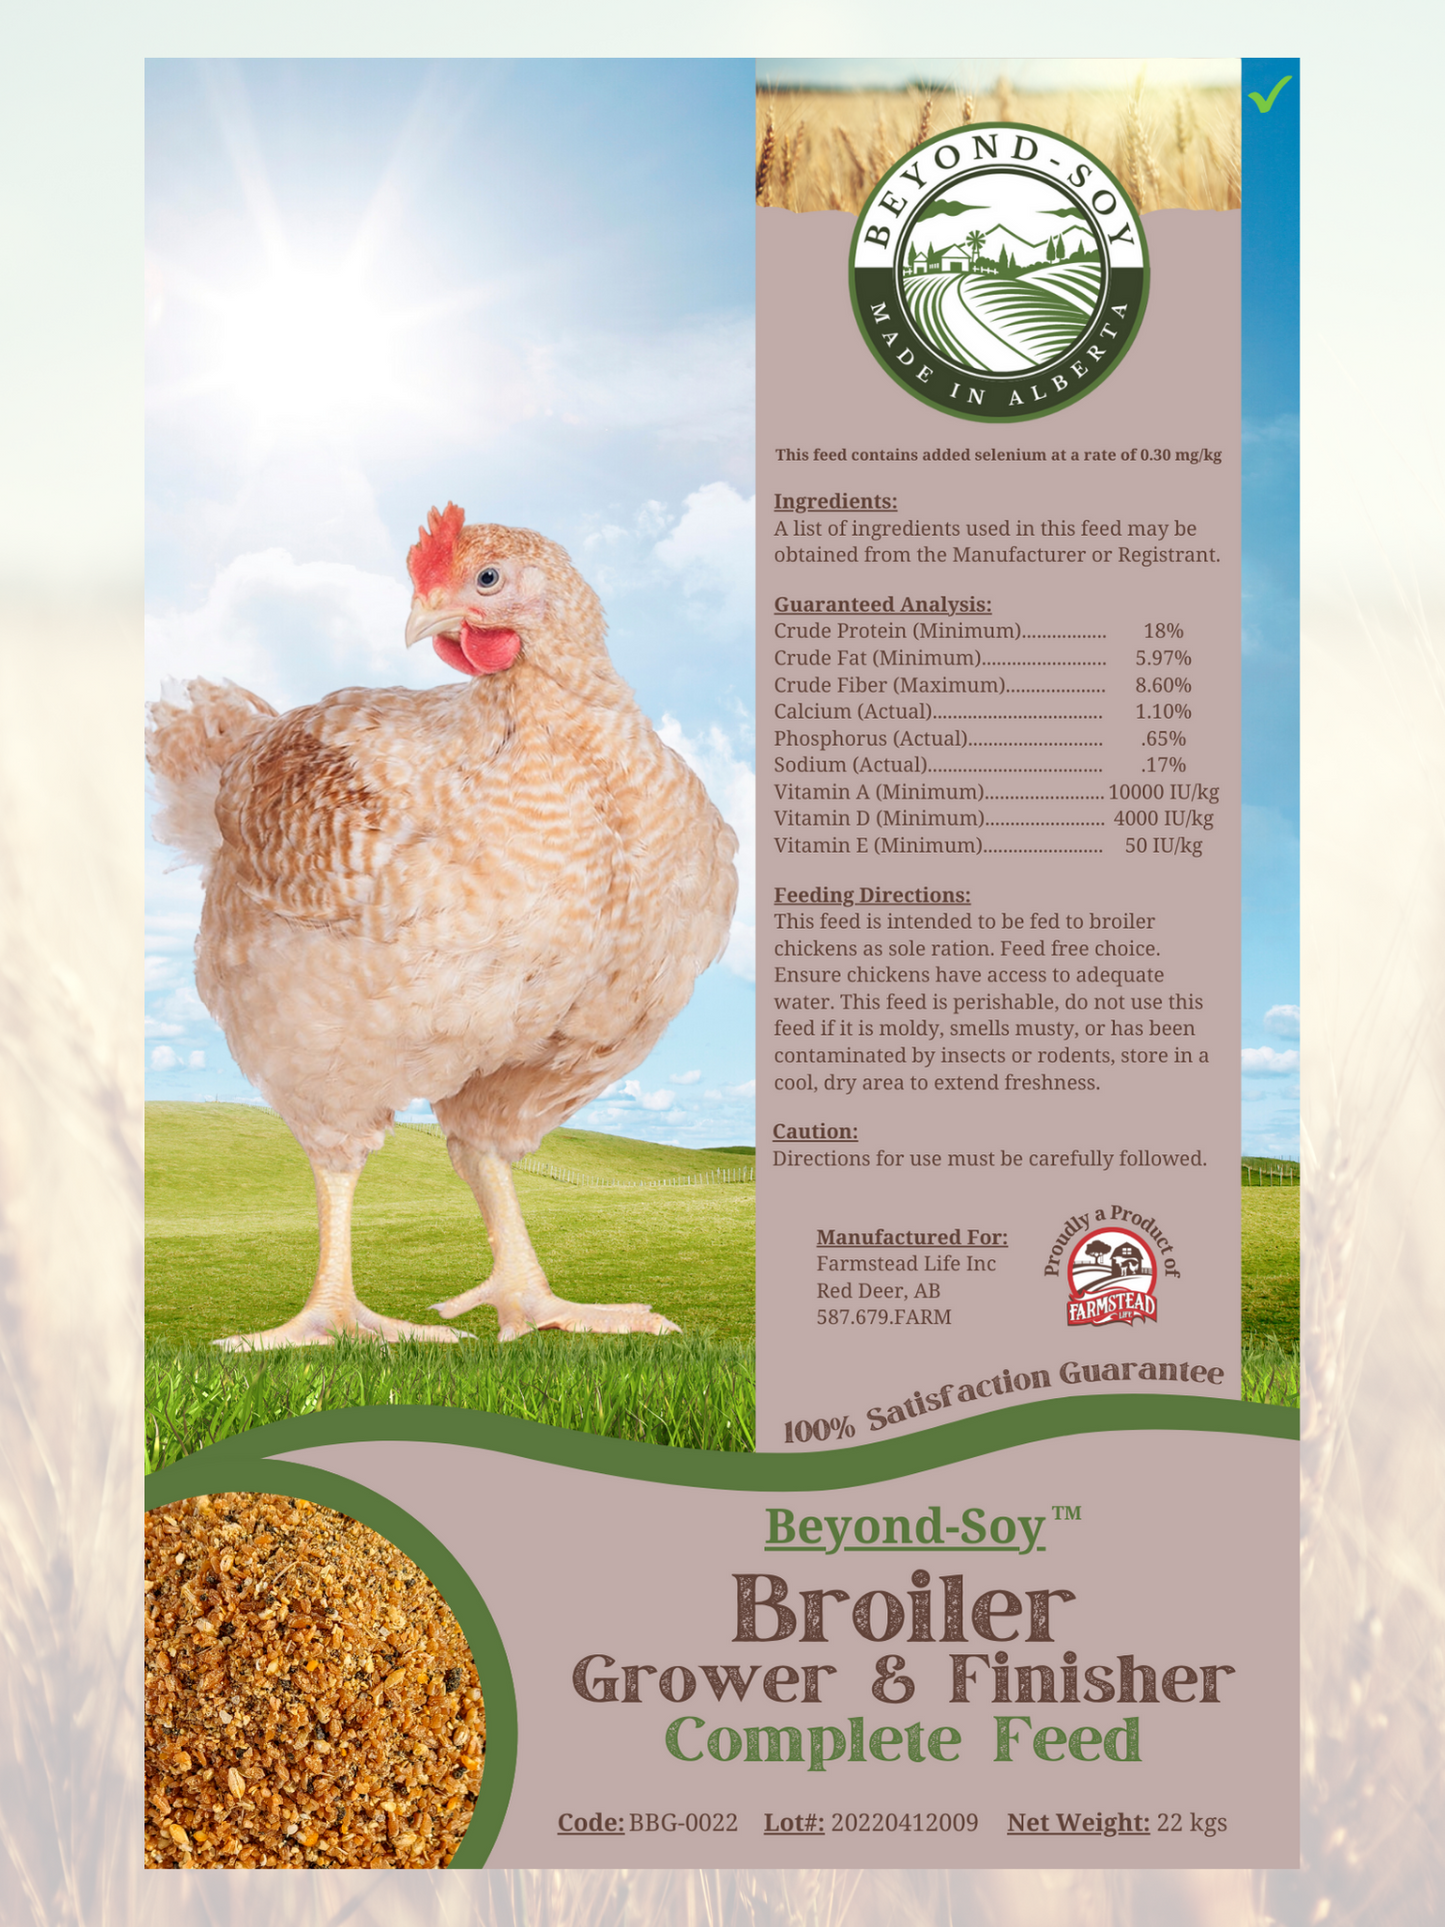 Broiler Grower Finisher - Beyond Soy - Farmstead Feeds